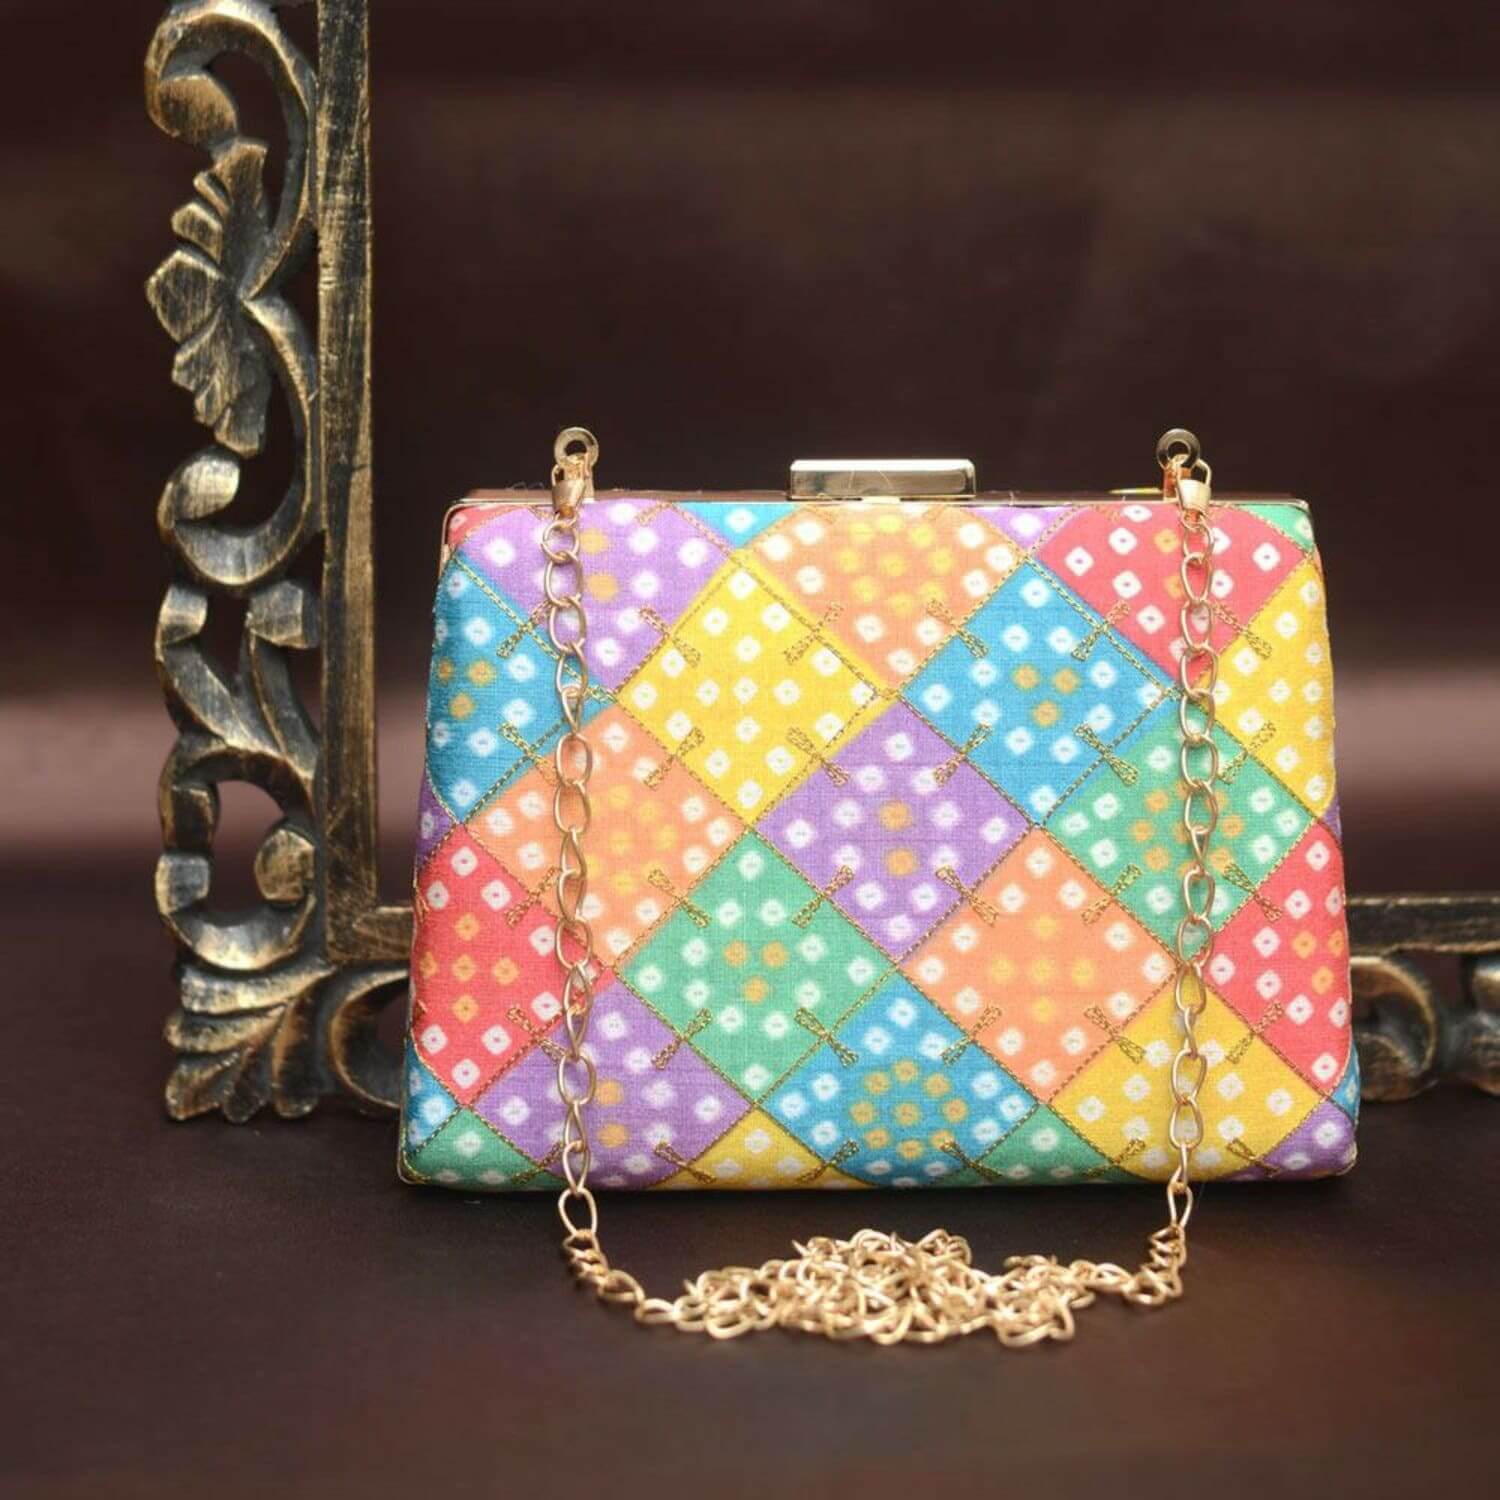 Bright colored Bandhani Embellished Ethnic Clutches, Purse with Metallic Strap